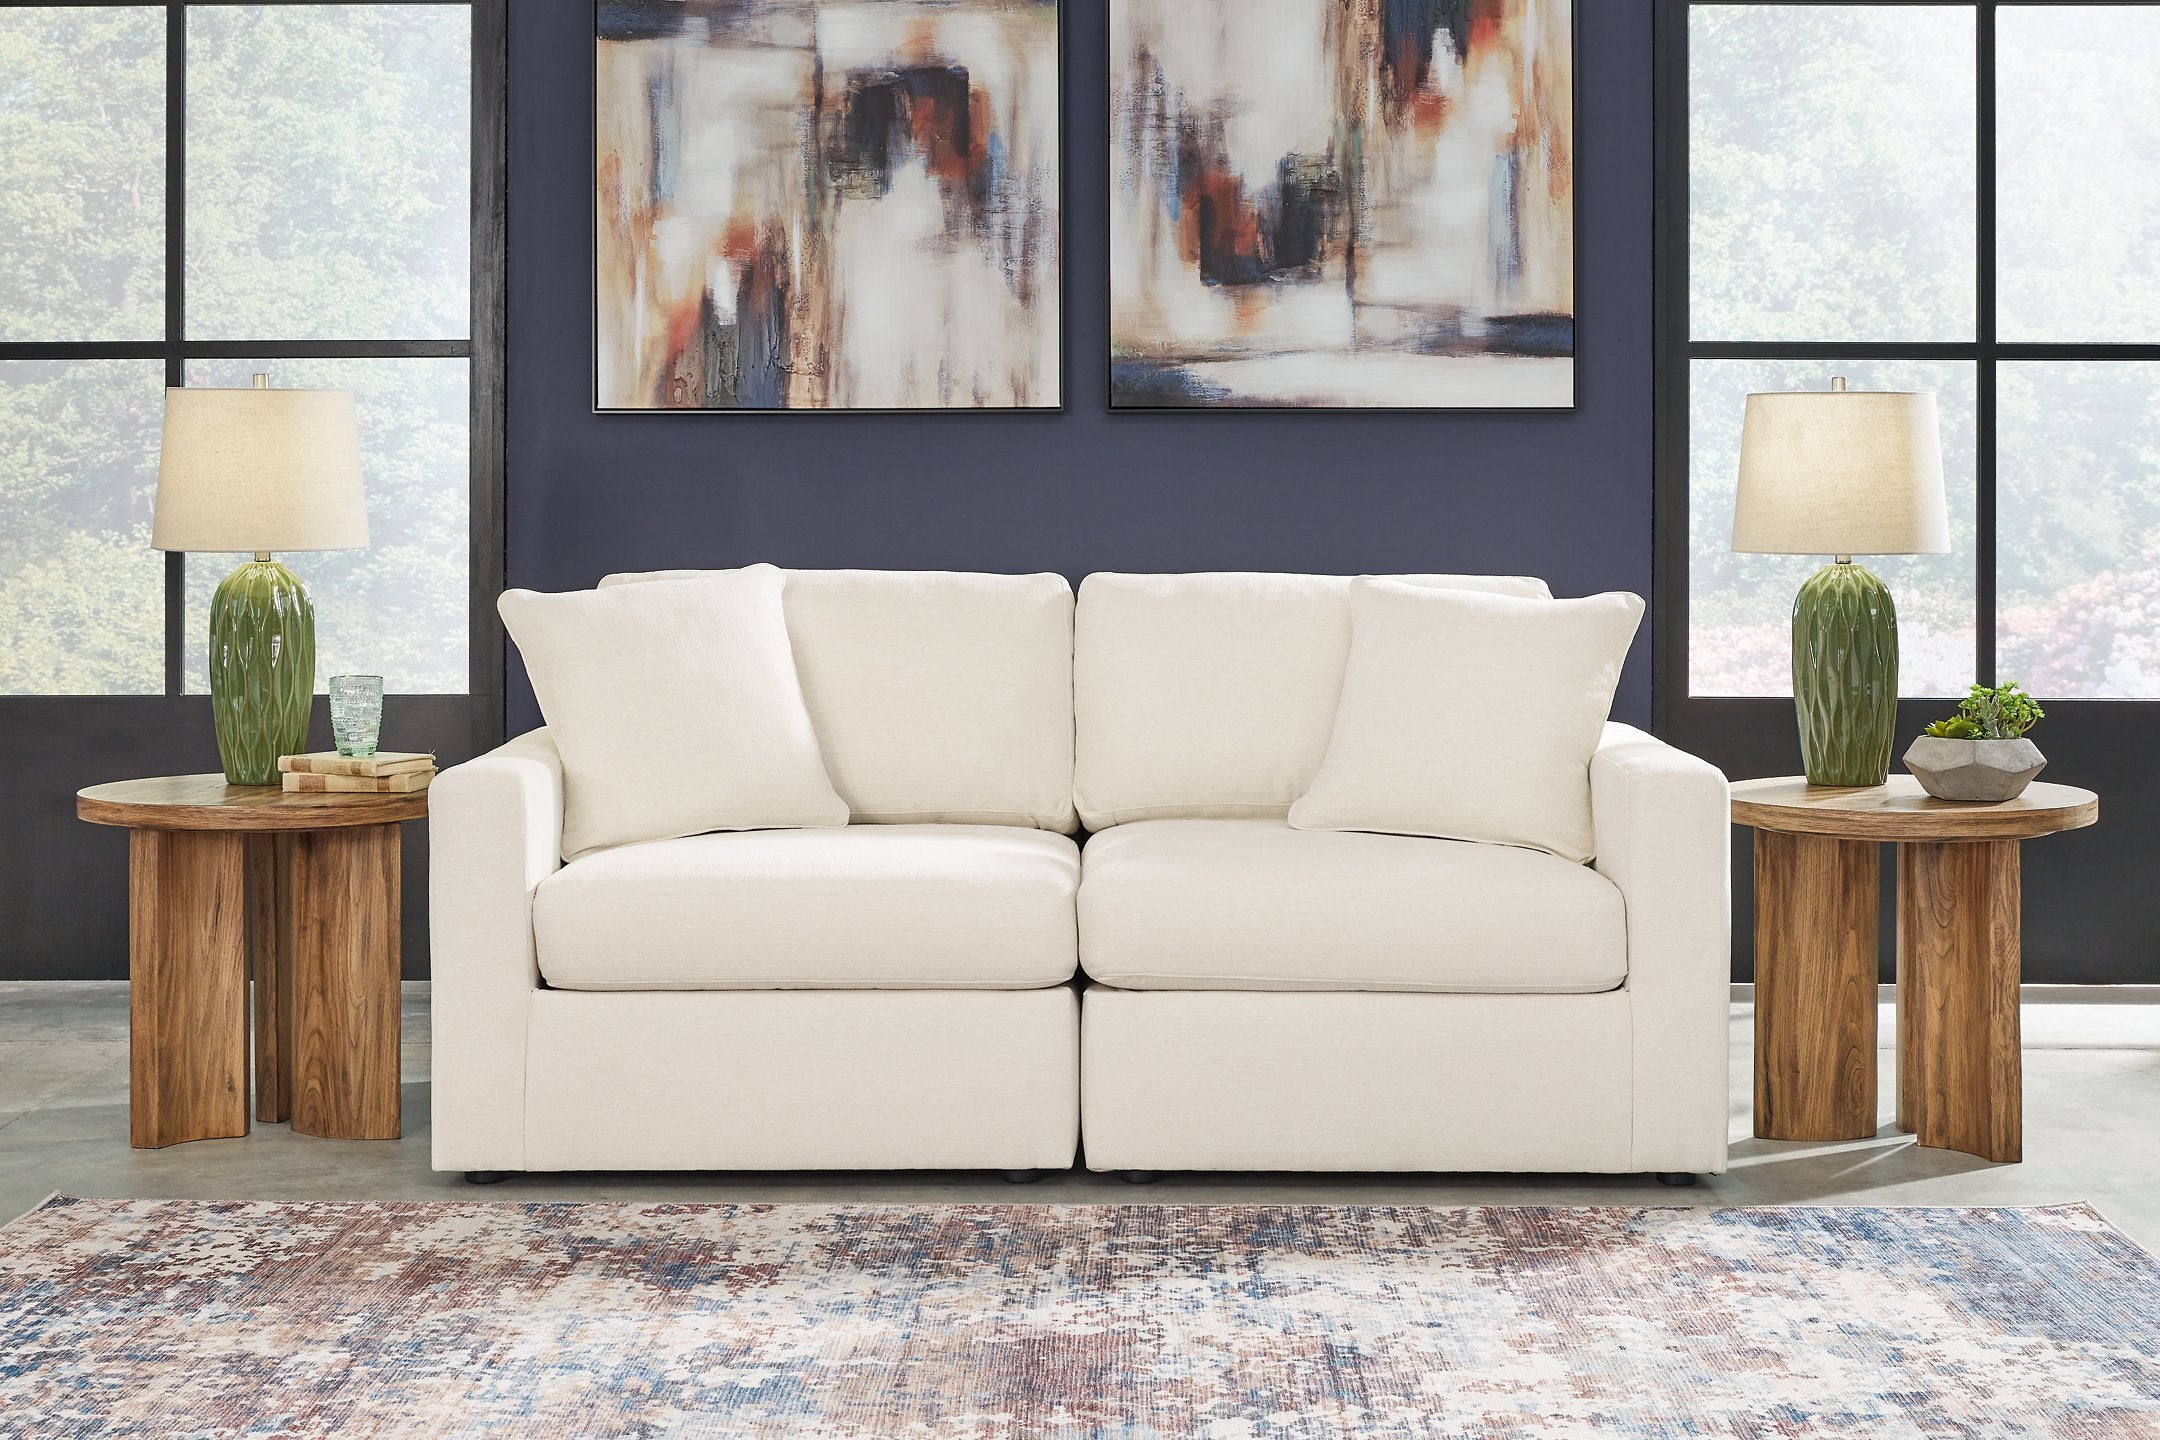 Modmax Sectional Loveseat image